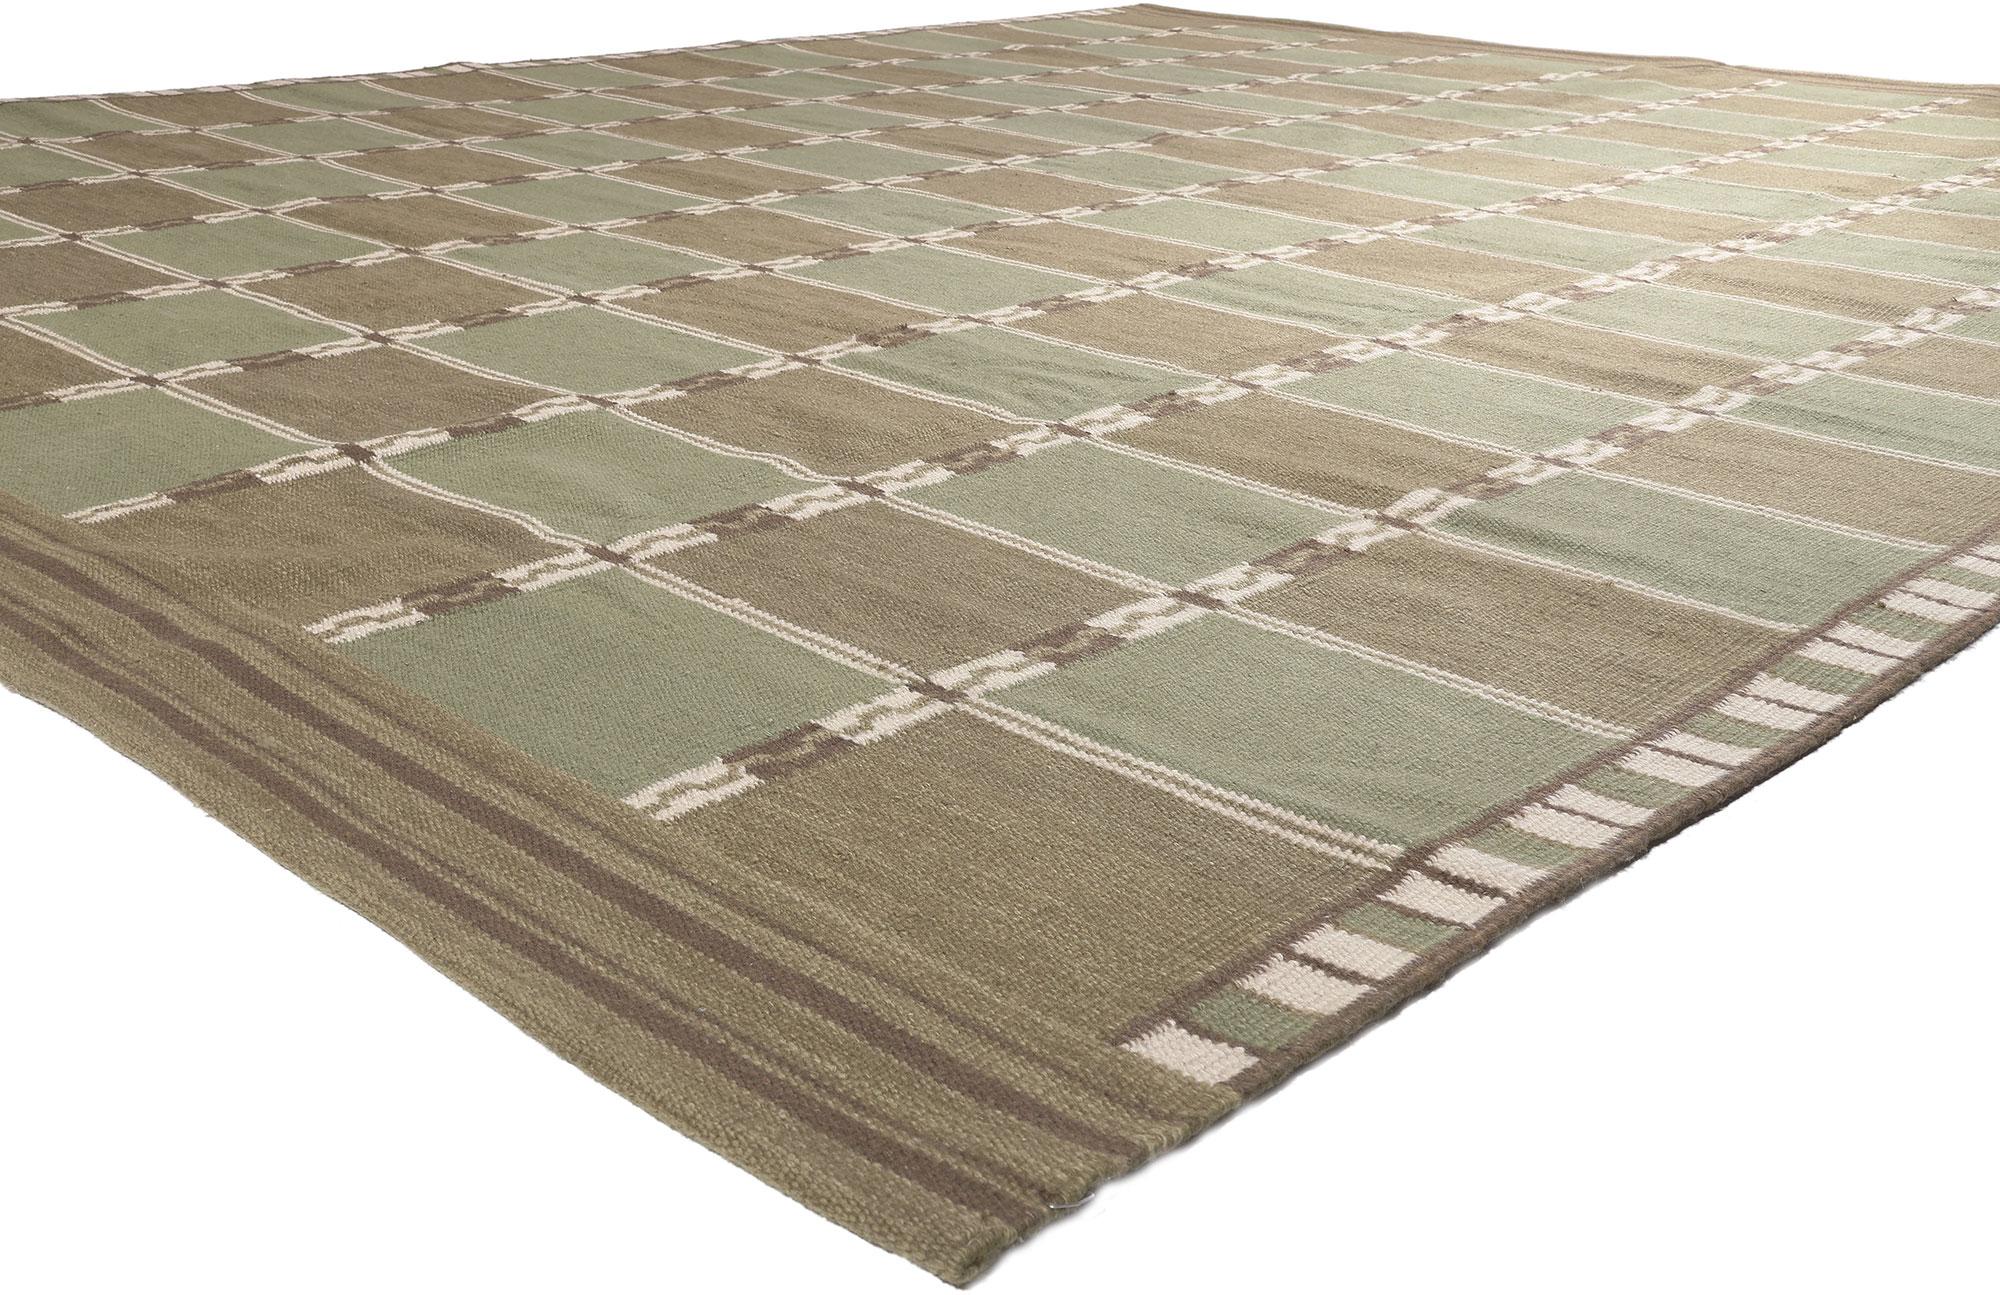 30944 New Swedish Inspired Kilim Rug, 12'03 x 14'11.
Scandinavian Modern meets Biophilic Design in this handwoven wool Swedish-inspired kilim rug. The eye-catching checked design and earthy colorway woven into this piece work together creating a